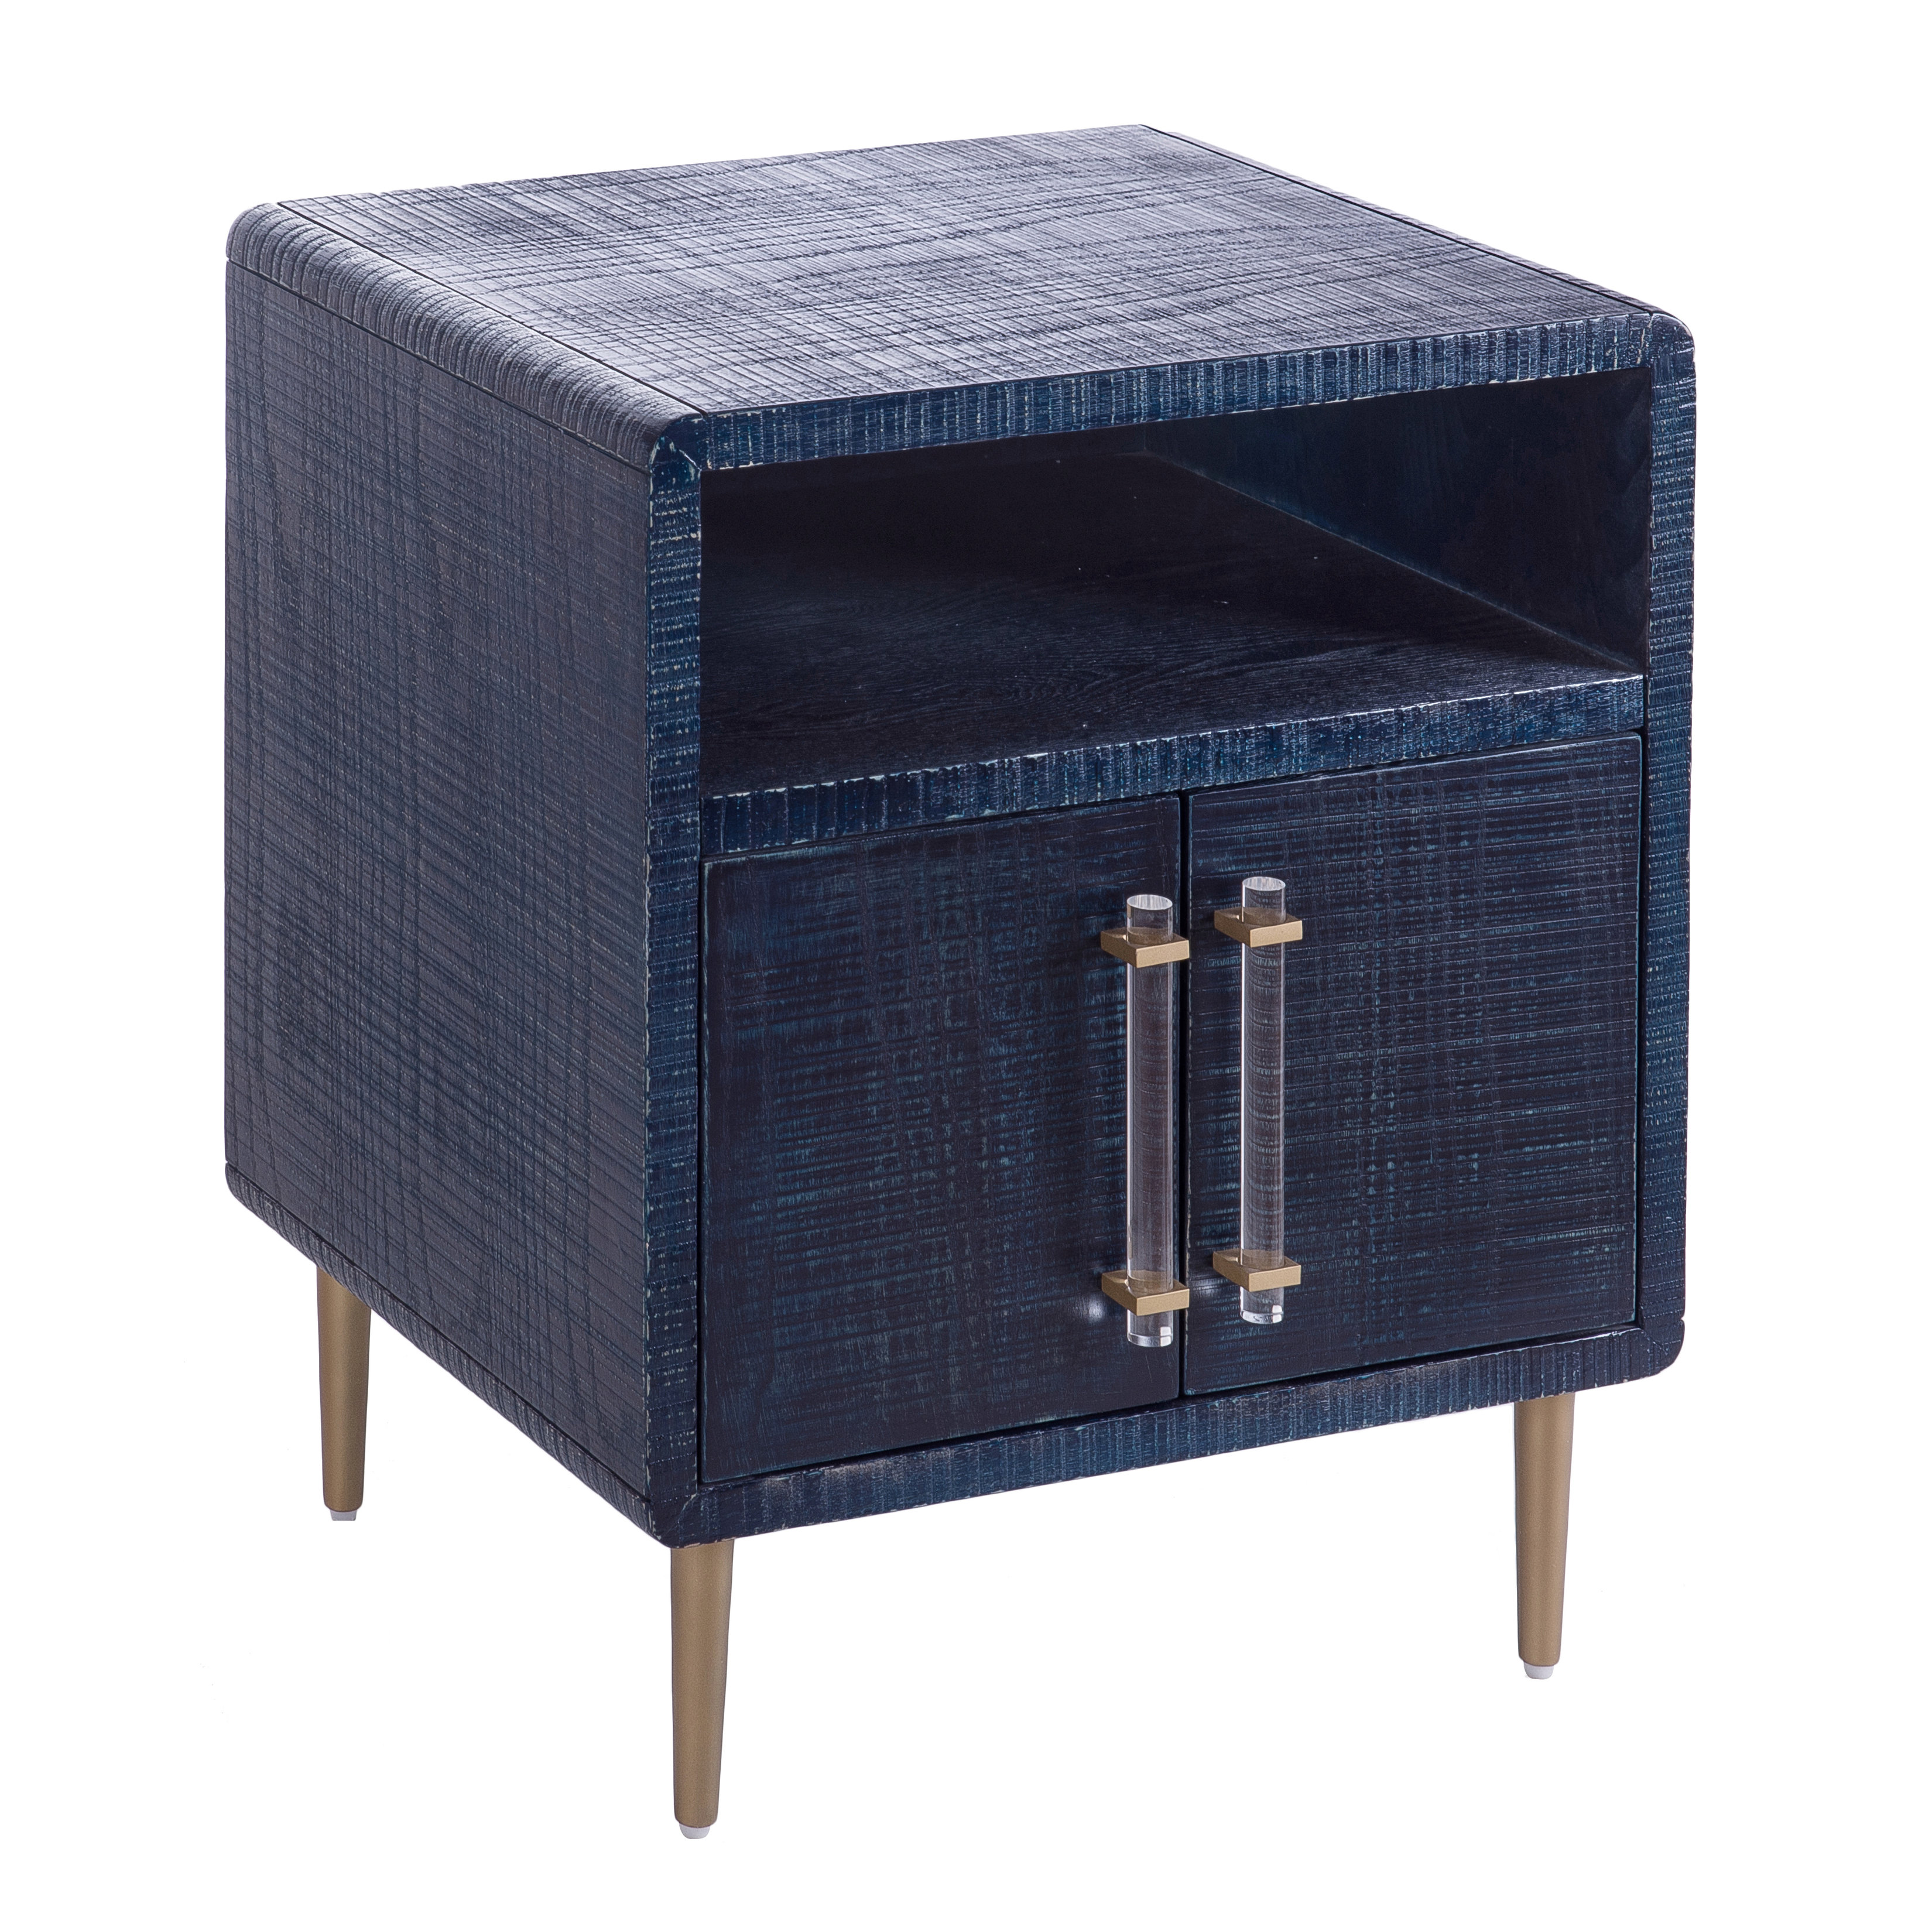 TOV Furniture Marco Textured Indigo Finish Side Table with Brass Legs - image 3 of 9